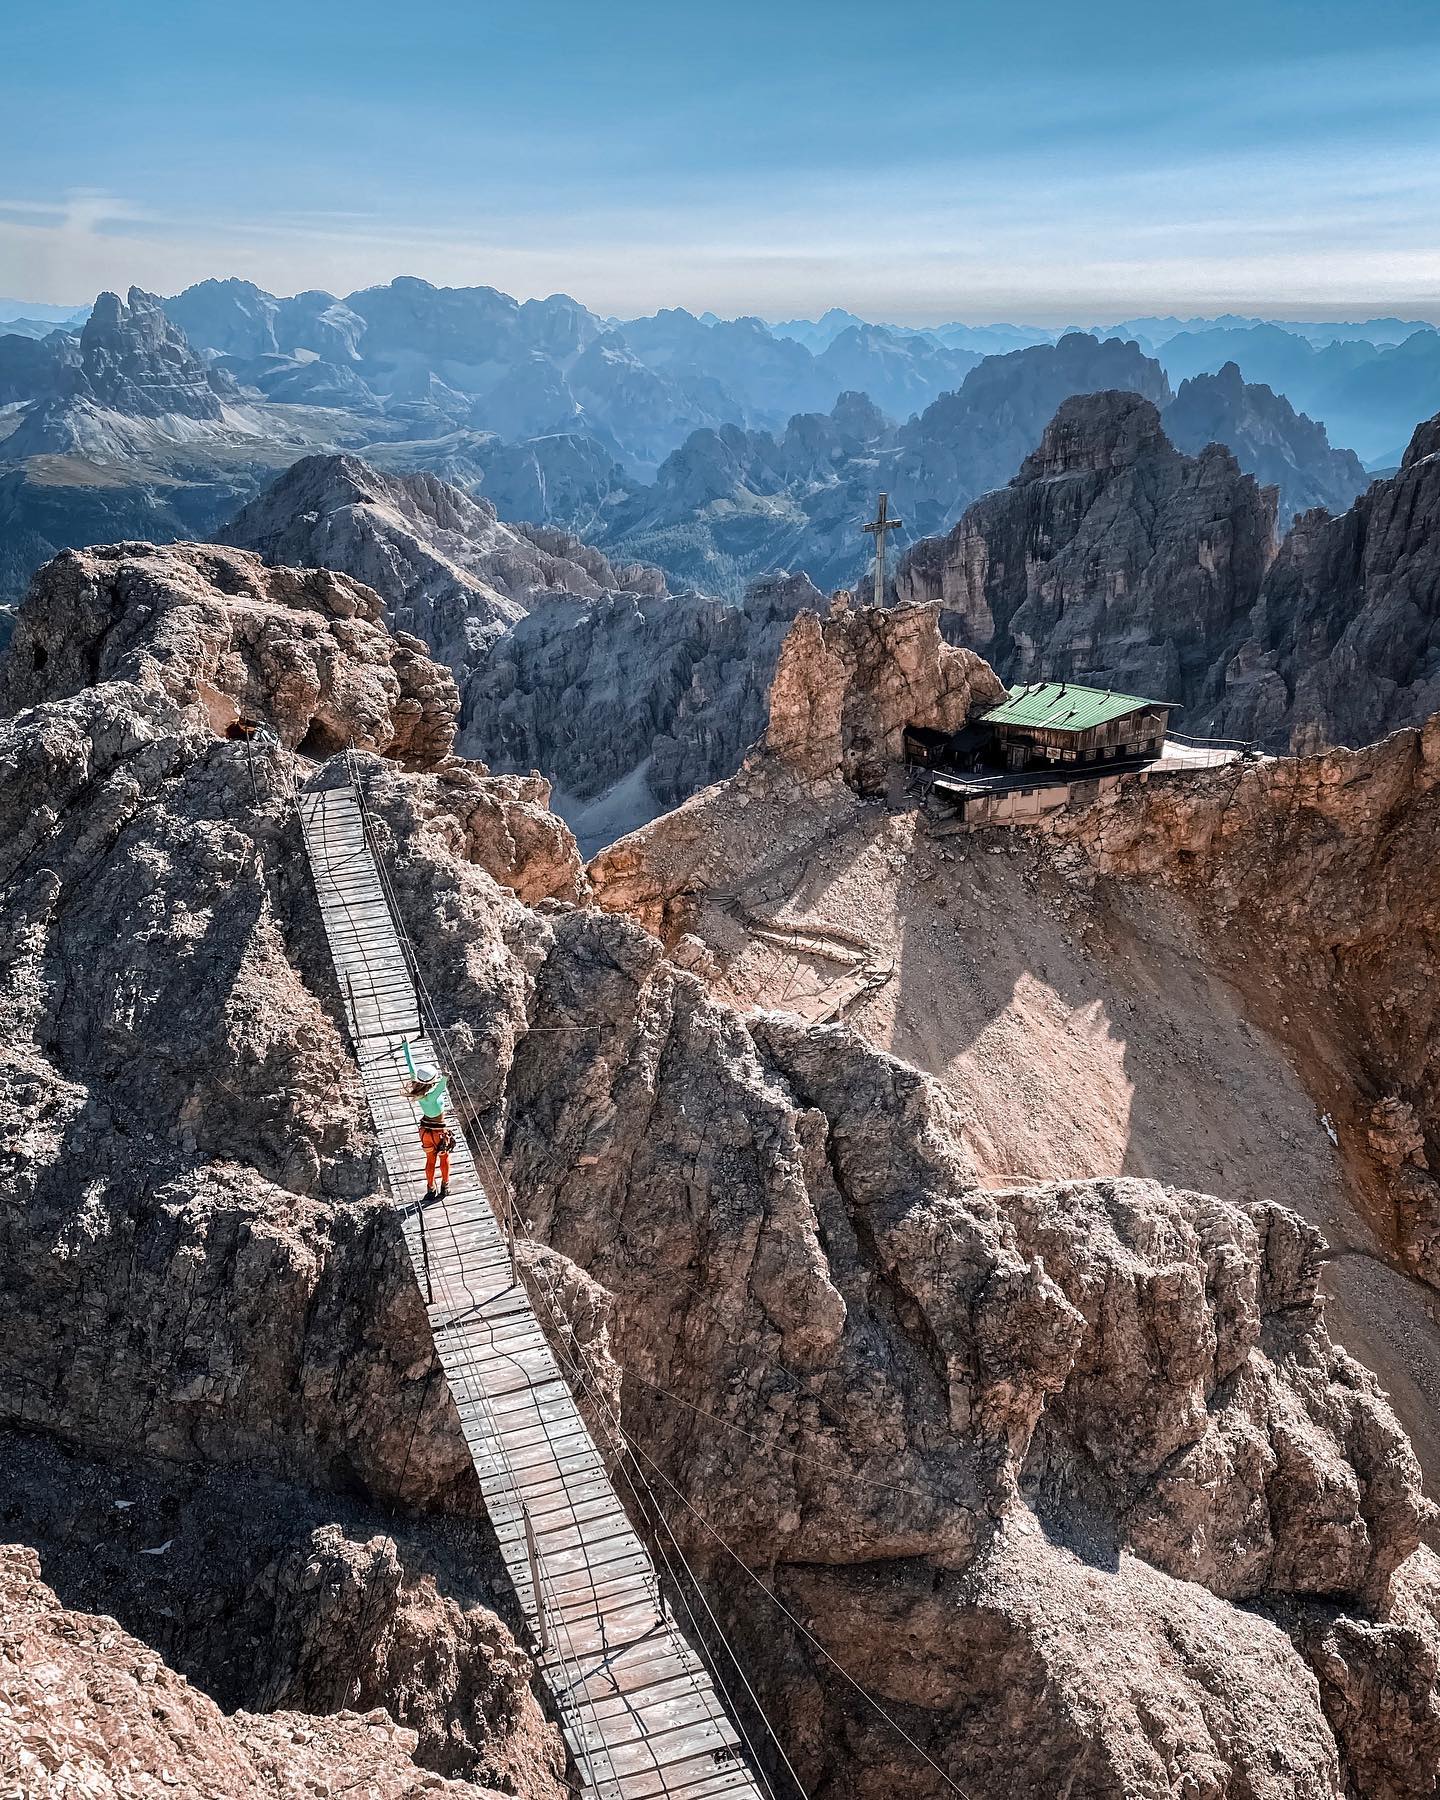 One more childhood dream fulfilled. Since I first saw the movie „cliffhanger“ with Sylvester Stallone when I was a child, I dream about hanging out on this bridge 🙏🏻
I guess same movie awakened my passion for the Dolomites 🎥 🍿 
Have you seen the movie? How do you like it? I love it ❤️
.
.
📸by @luca.schranz 
.
.
#dolomiten #dolomiti #dolomites #viaferrata #klettersteig #montecristallo #cristallo #italy #italia #italien #adventure #hike #outdoor #adventuregirl #explore #explorer #mountaingirl #hikinggirl #hiker